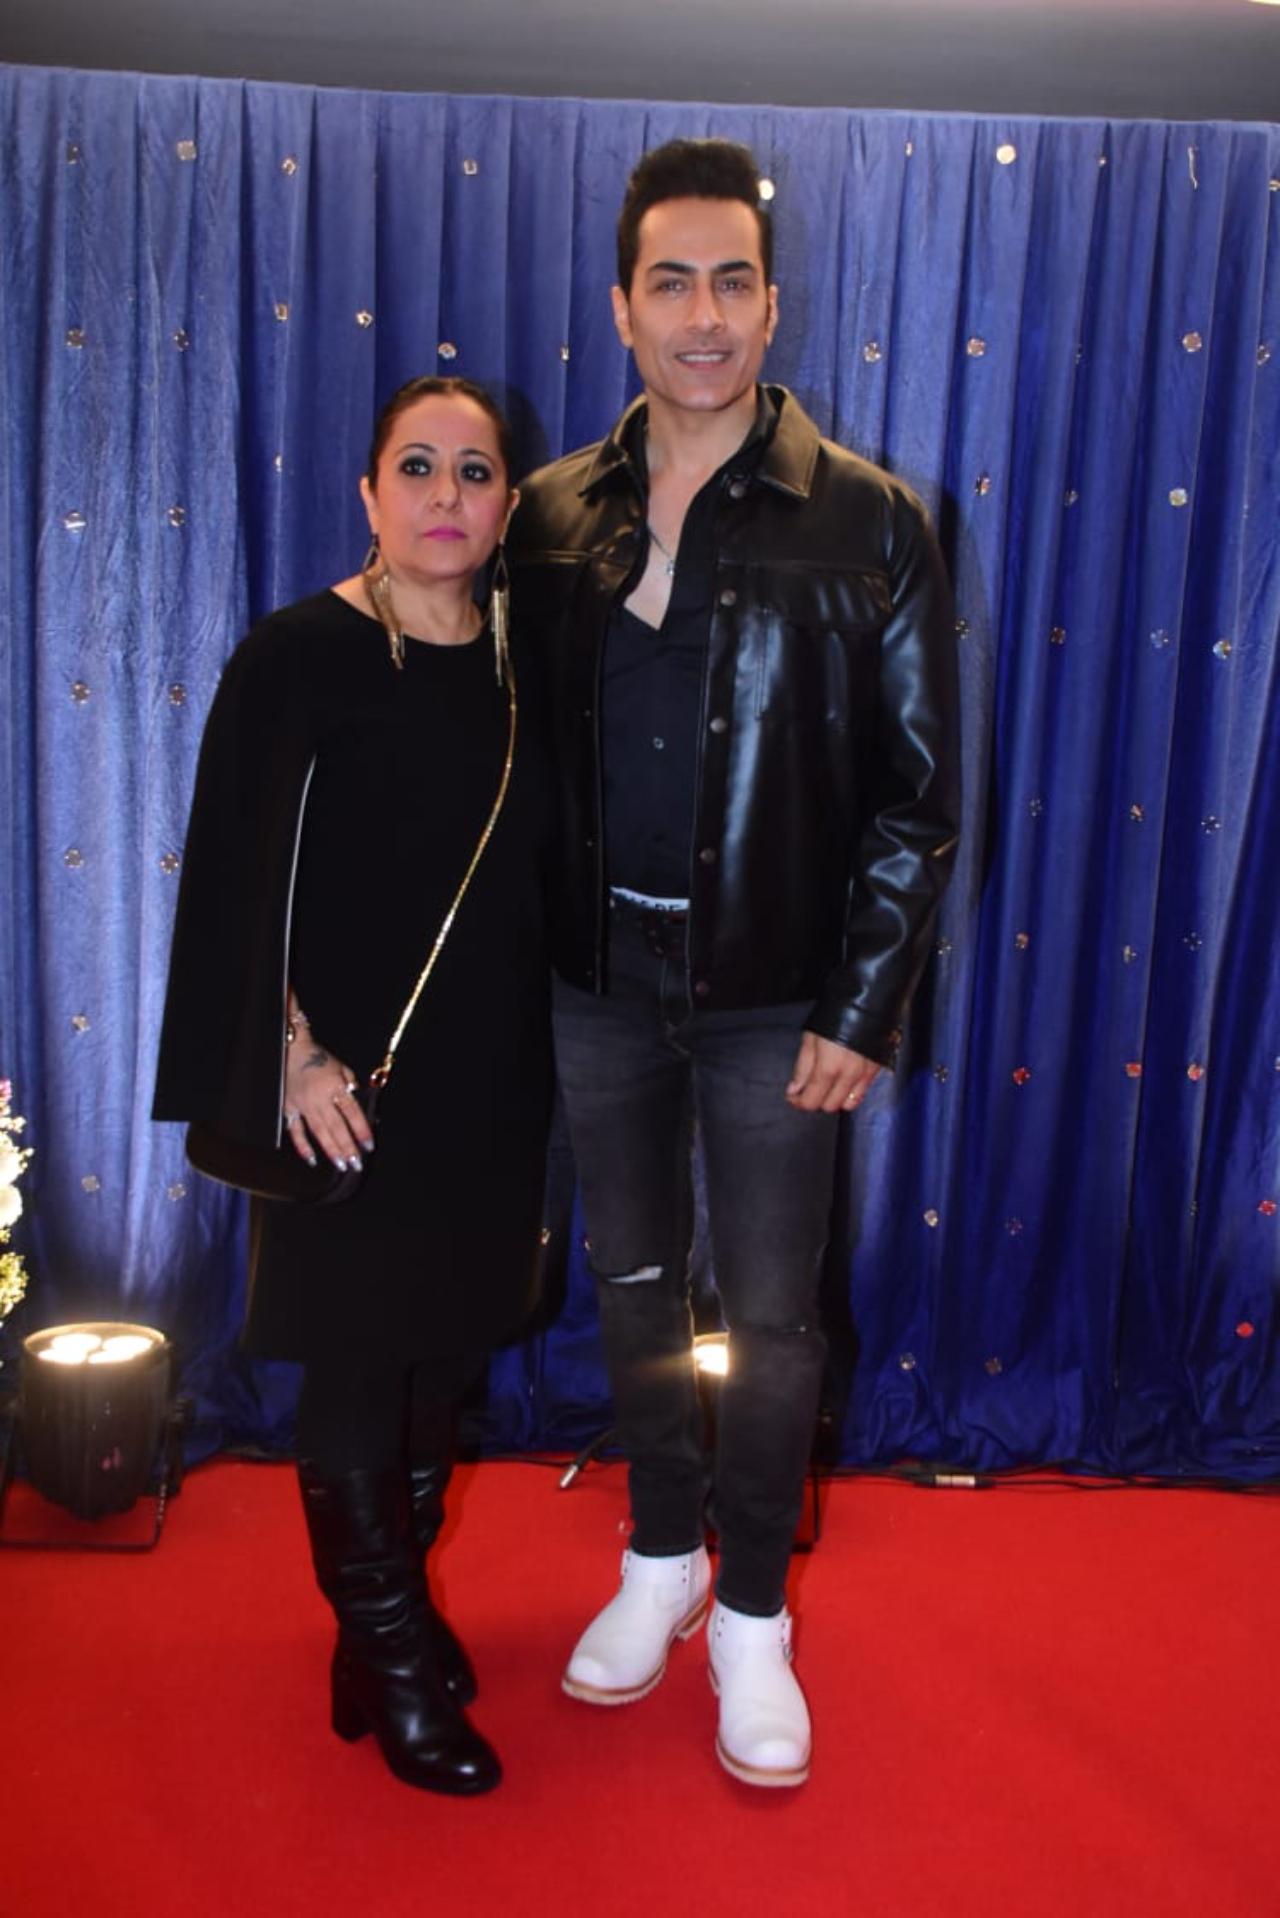 Anupamaa actor and model Sudhanshu Pandey also attended Sonu Nigam's birthday bash along with his wife, Mona Pandey. The couple looked all ready for a fun Saturday night party with Bollywood's biggest entertainers in their stylish black outfits